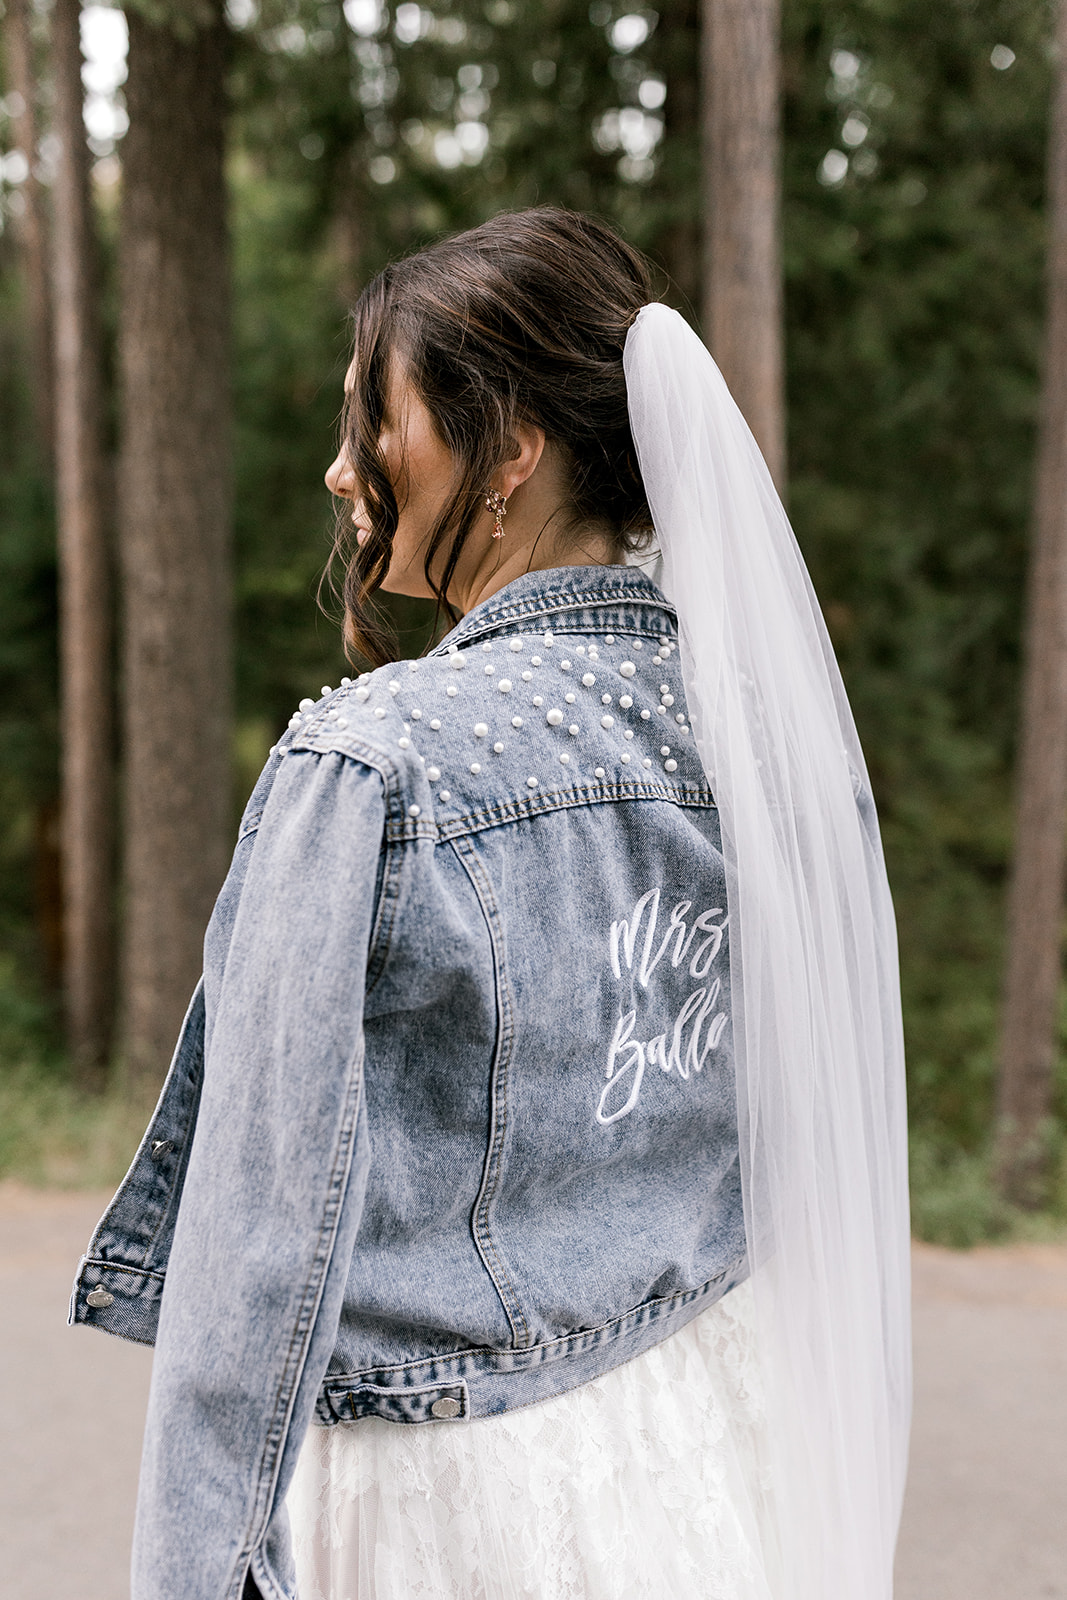 Detail photo of the bride’s pearl embroidered jean jacket